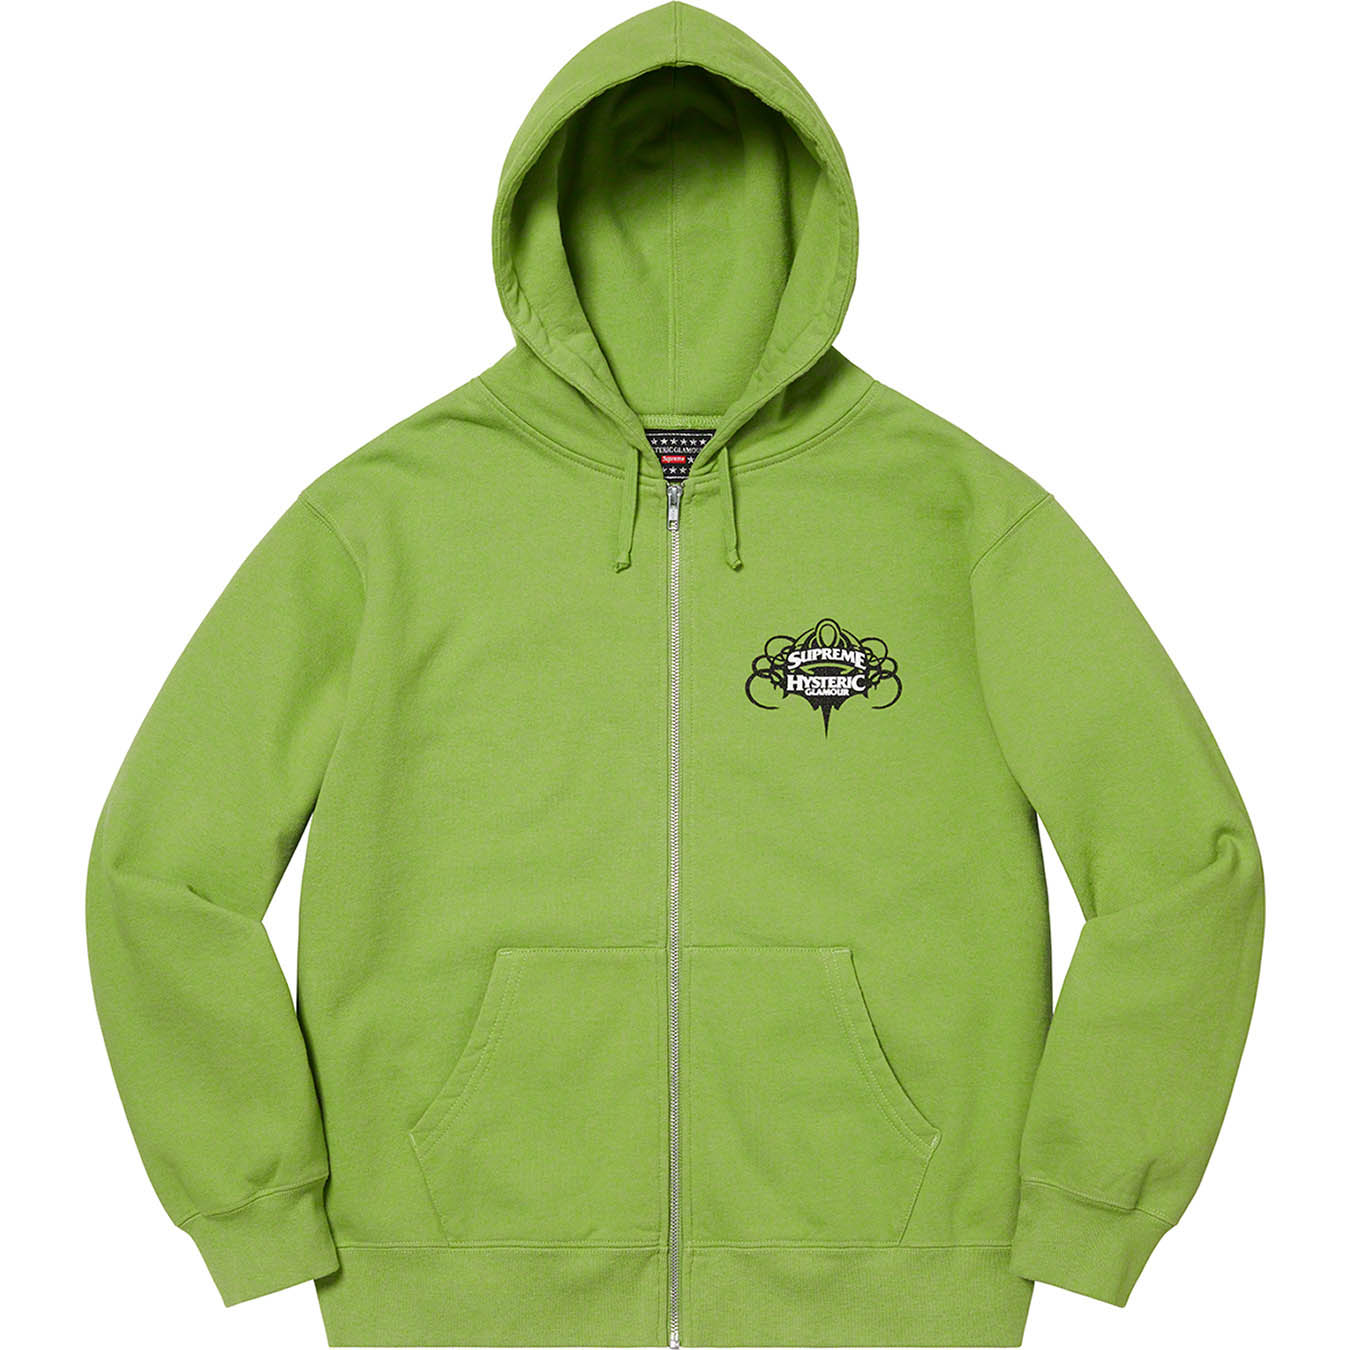 Supreme®/HYSTERIC GLAMOUR Zip Up Hooded Sweatshirt | Supreme 21ss